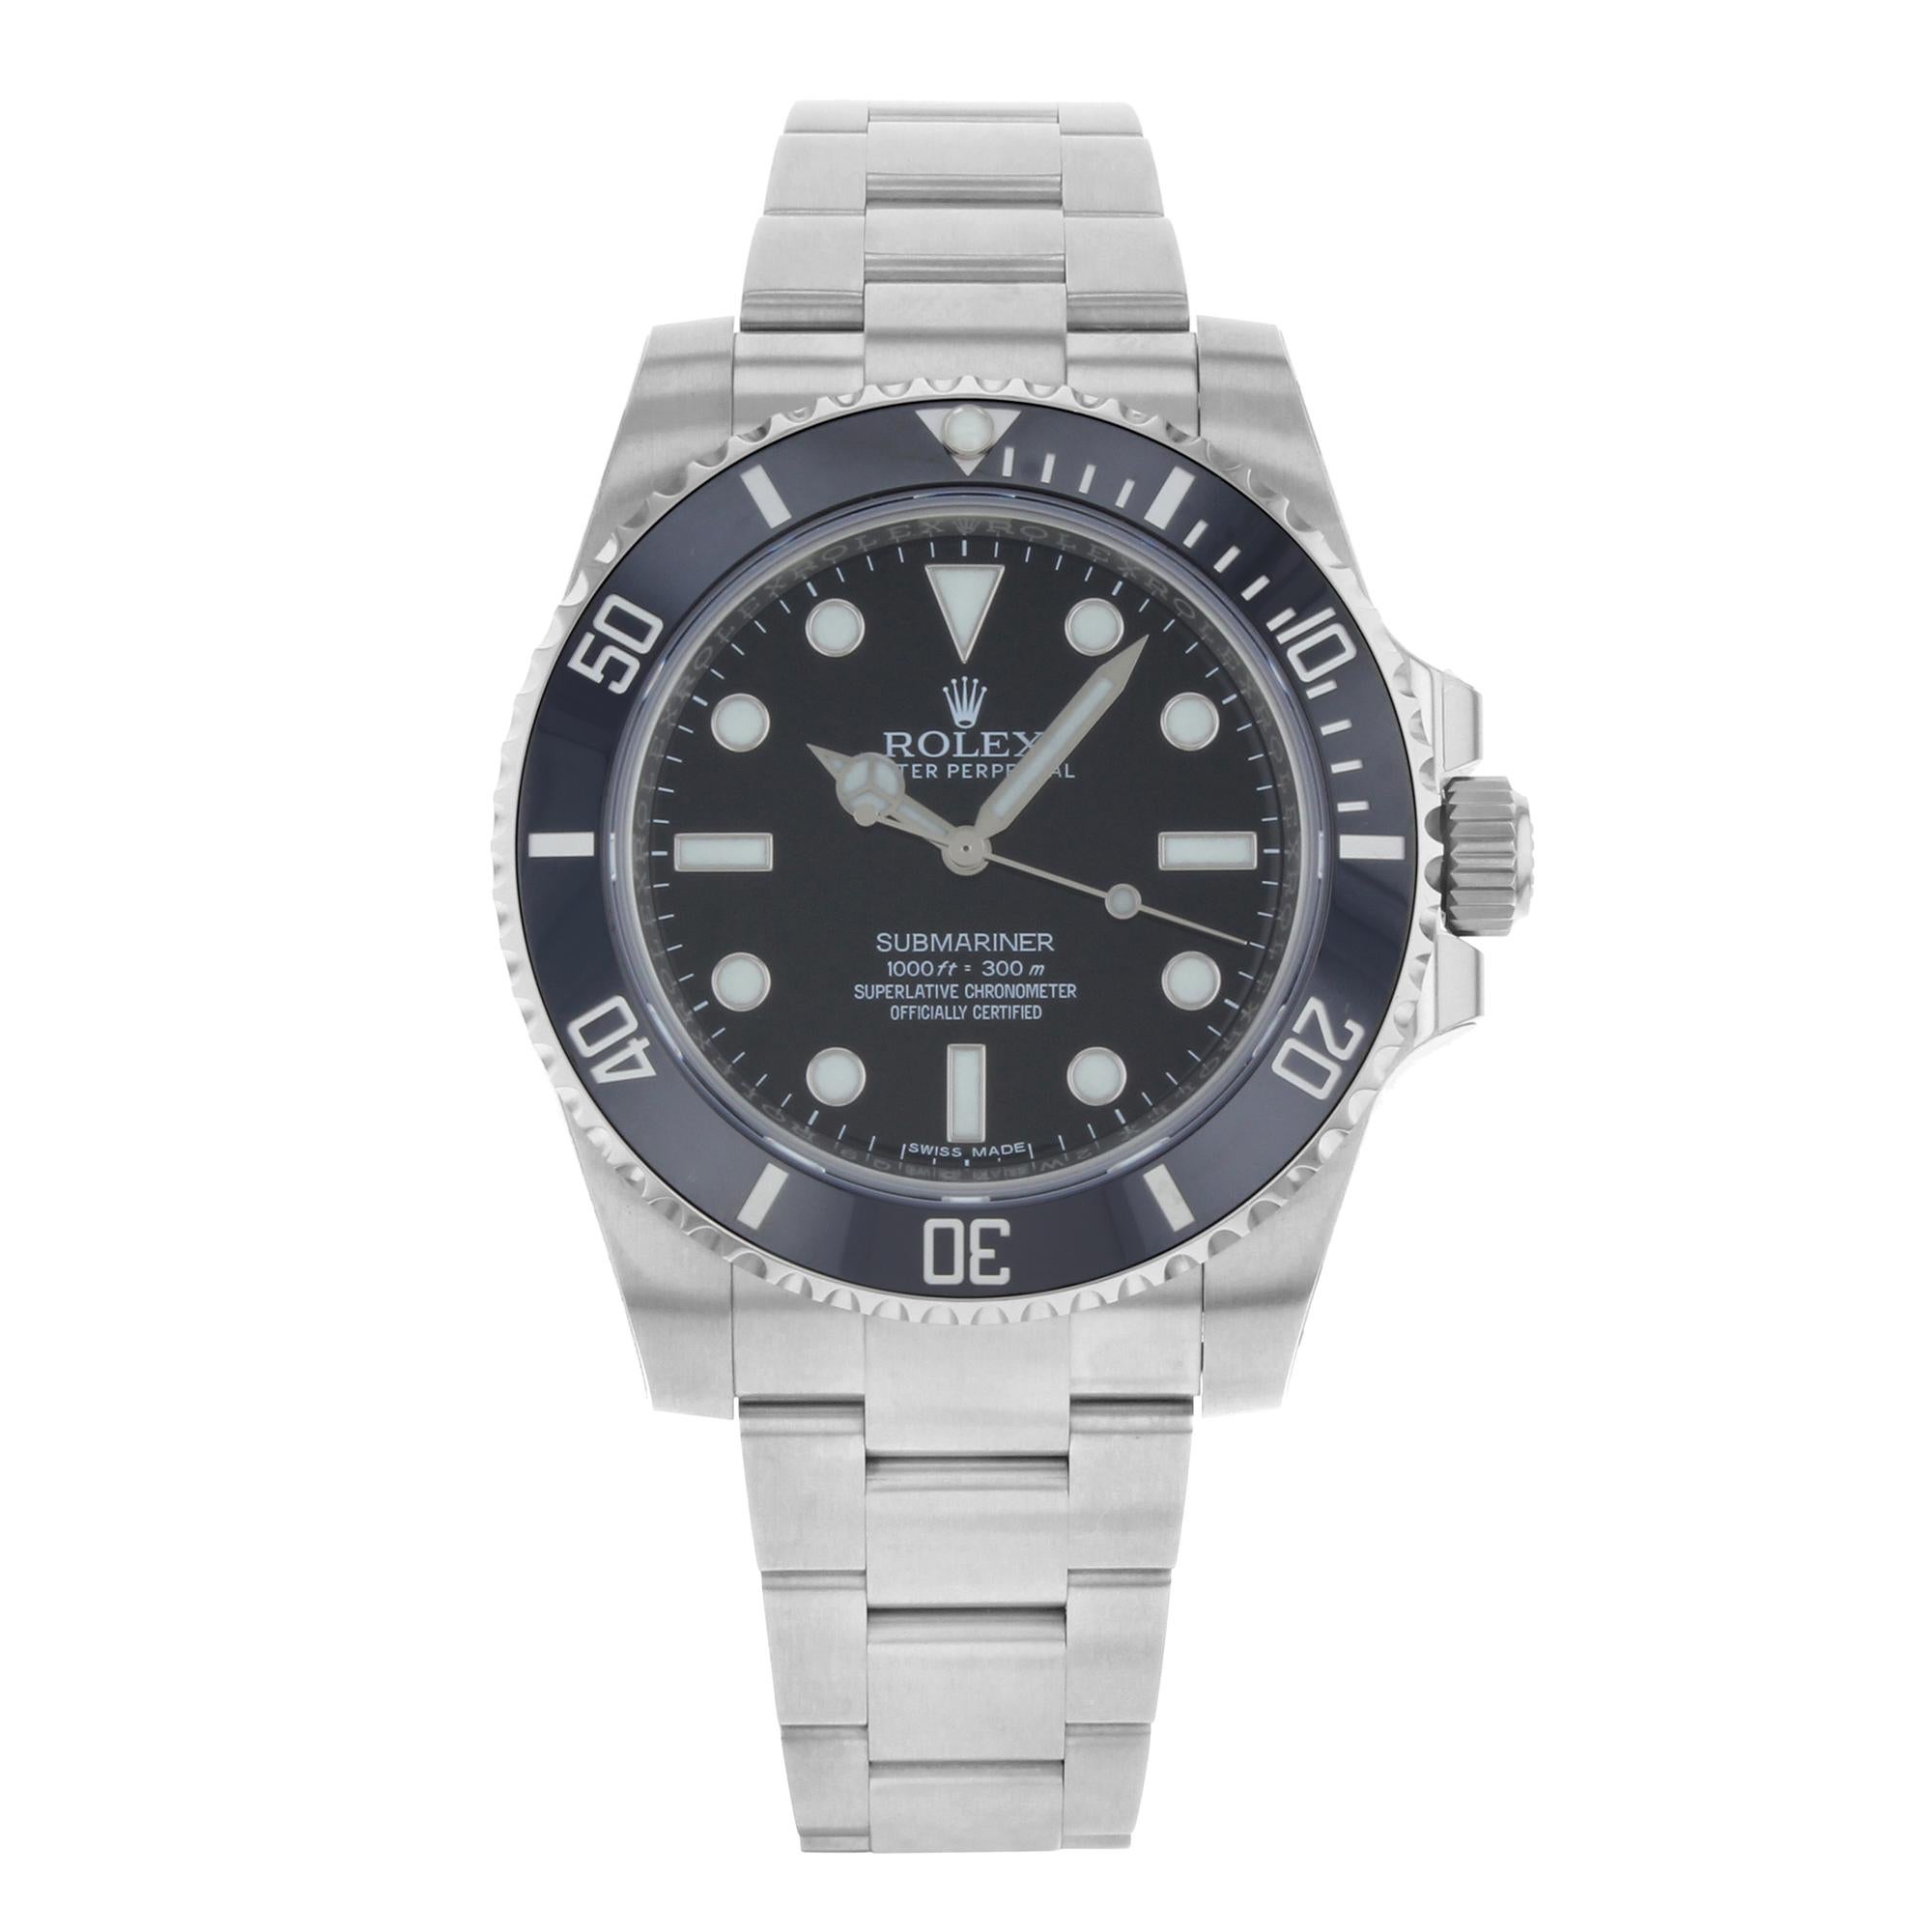 This brand new Rolex Submariner 114060 is a beautiful men's timepiece that is powered by an automatic movement which is cased in a stainless steel case. It has a round shape face, no features dial and has hand sticks & dots style markers. It is